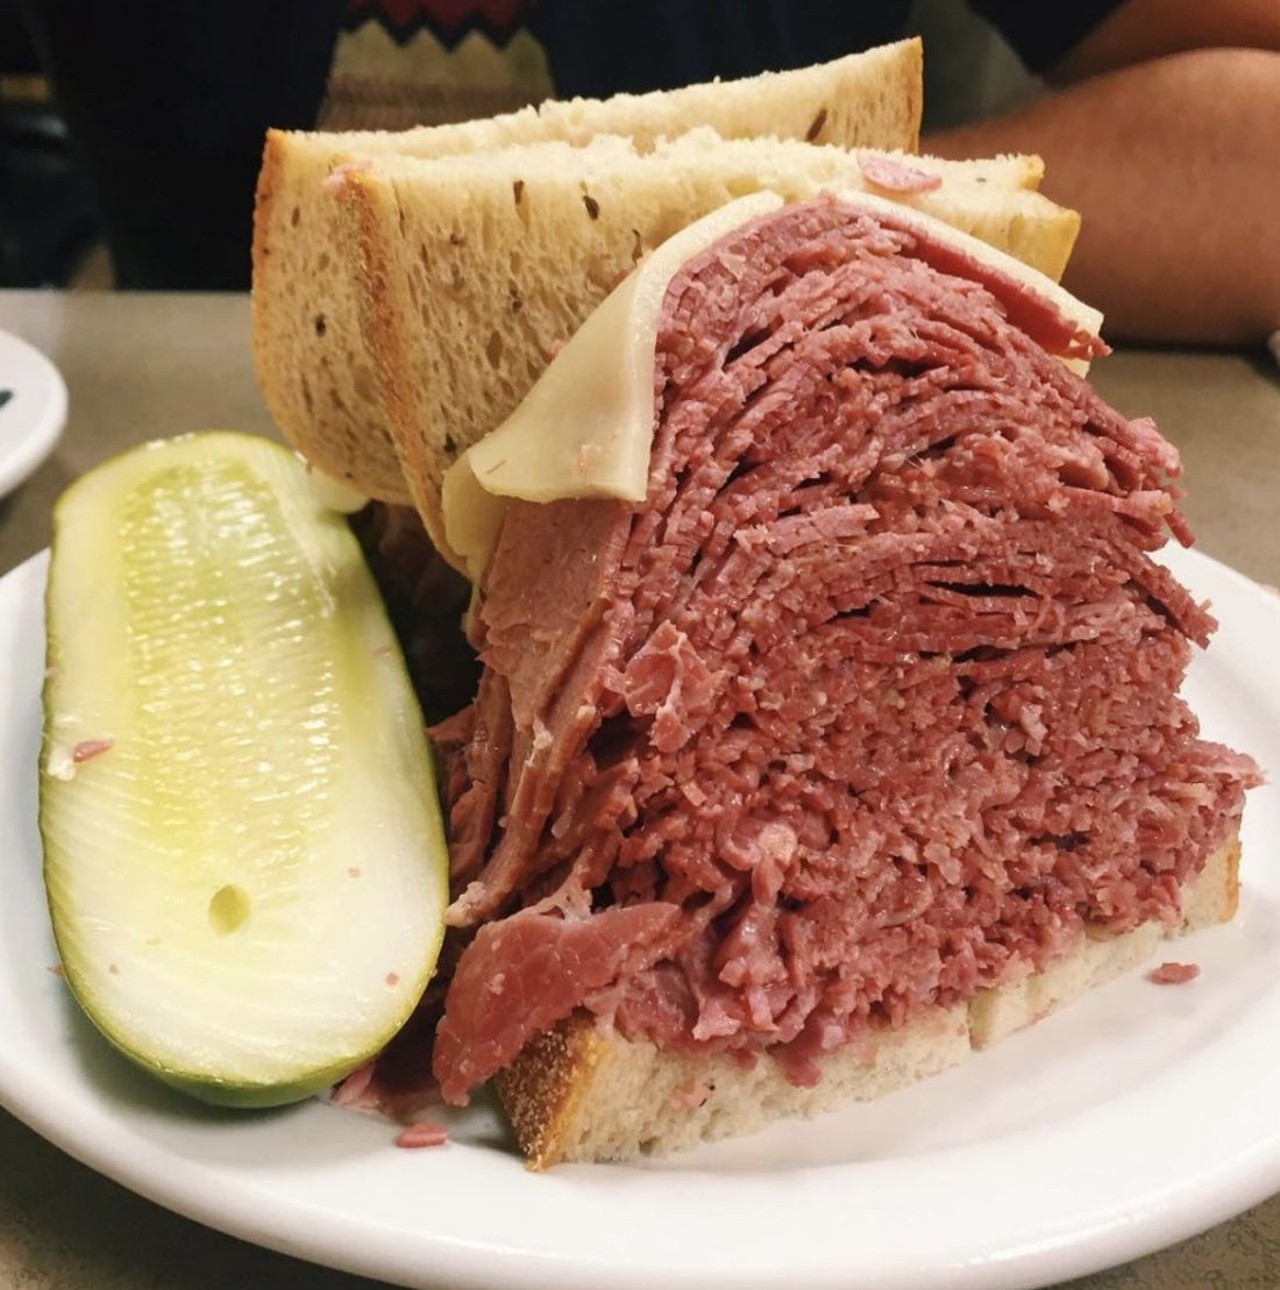  Corned Beef From Slyman&#146;s
3106 St. Clair Ave., Cleveland
Amaze your friends by ordering in Slymaneze: a &#147;natural&#148; means plain; &#147;original&#148; comes with mustard; and &#147;Smurf&#148; buys you one with Swiss and mustard (which ain&#146;t kosher, by the way).
Photo via @AGirlAboutChicago/Instagram